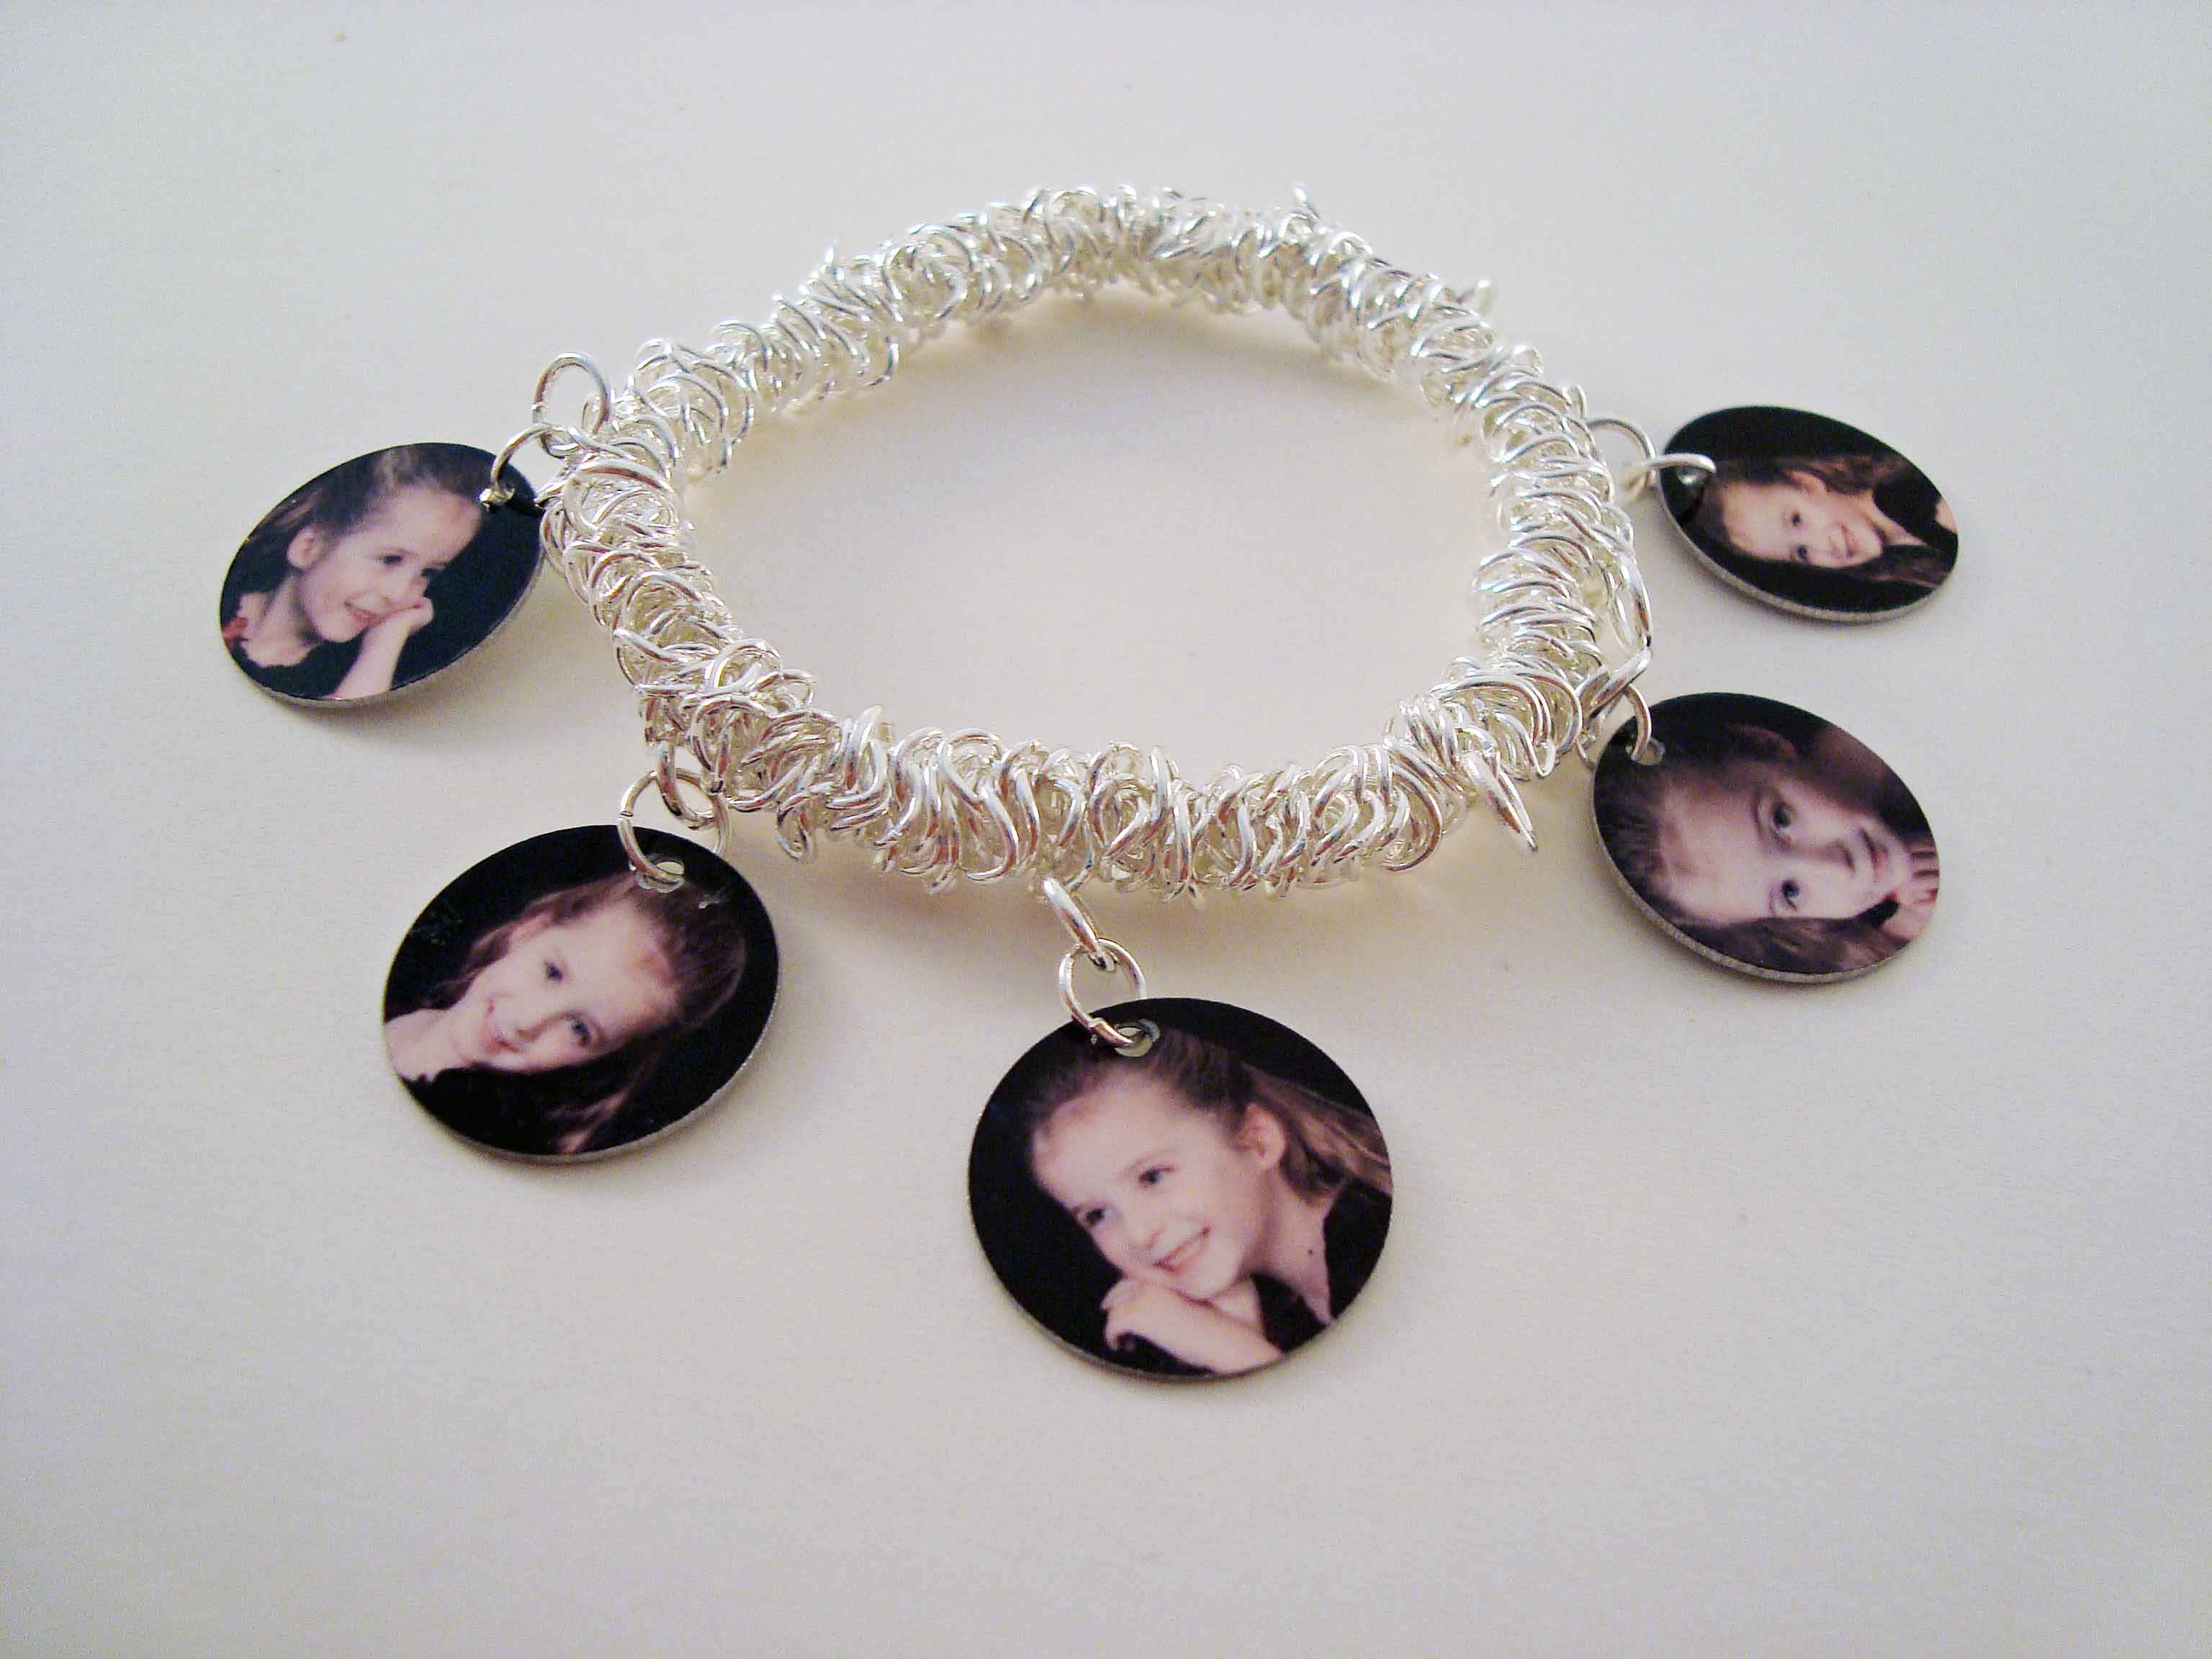 Charm Bracelet made with sublimation printing